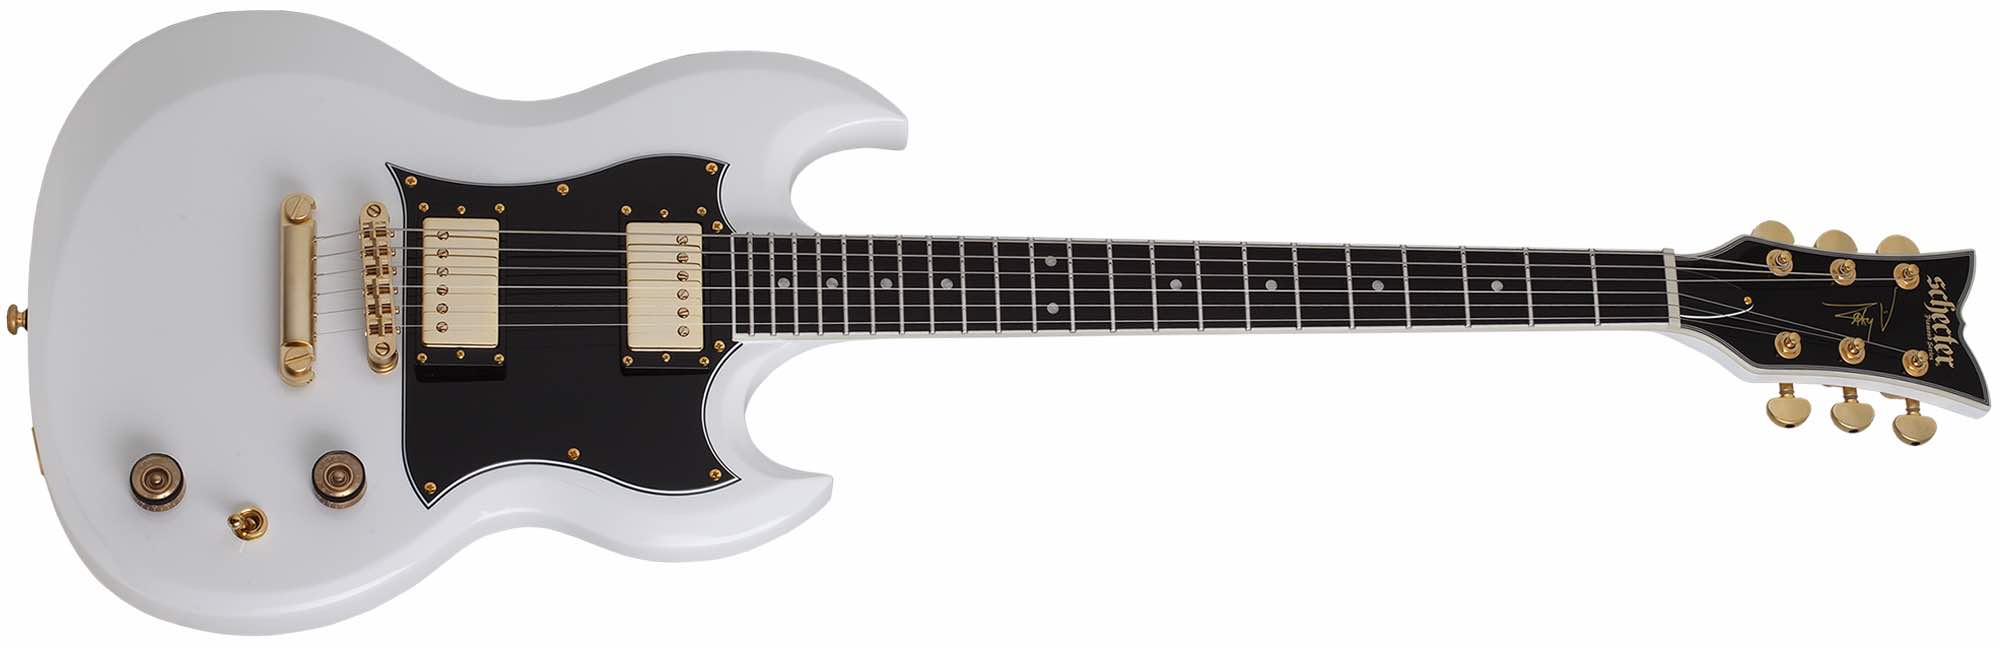 ZV-H6LLYW66D Gloss White Right Handed Schecter ZV-H6LLYW66D, Zacky Vengeance's new signature guitar Zacky Vengeance signature guitar", Schecter ZV-H6LLYW66D, "eft-handed guitar